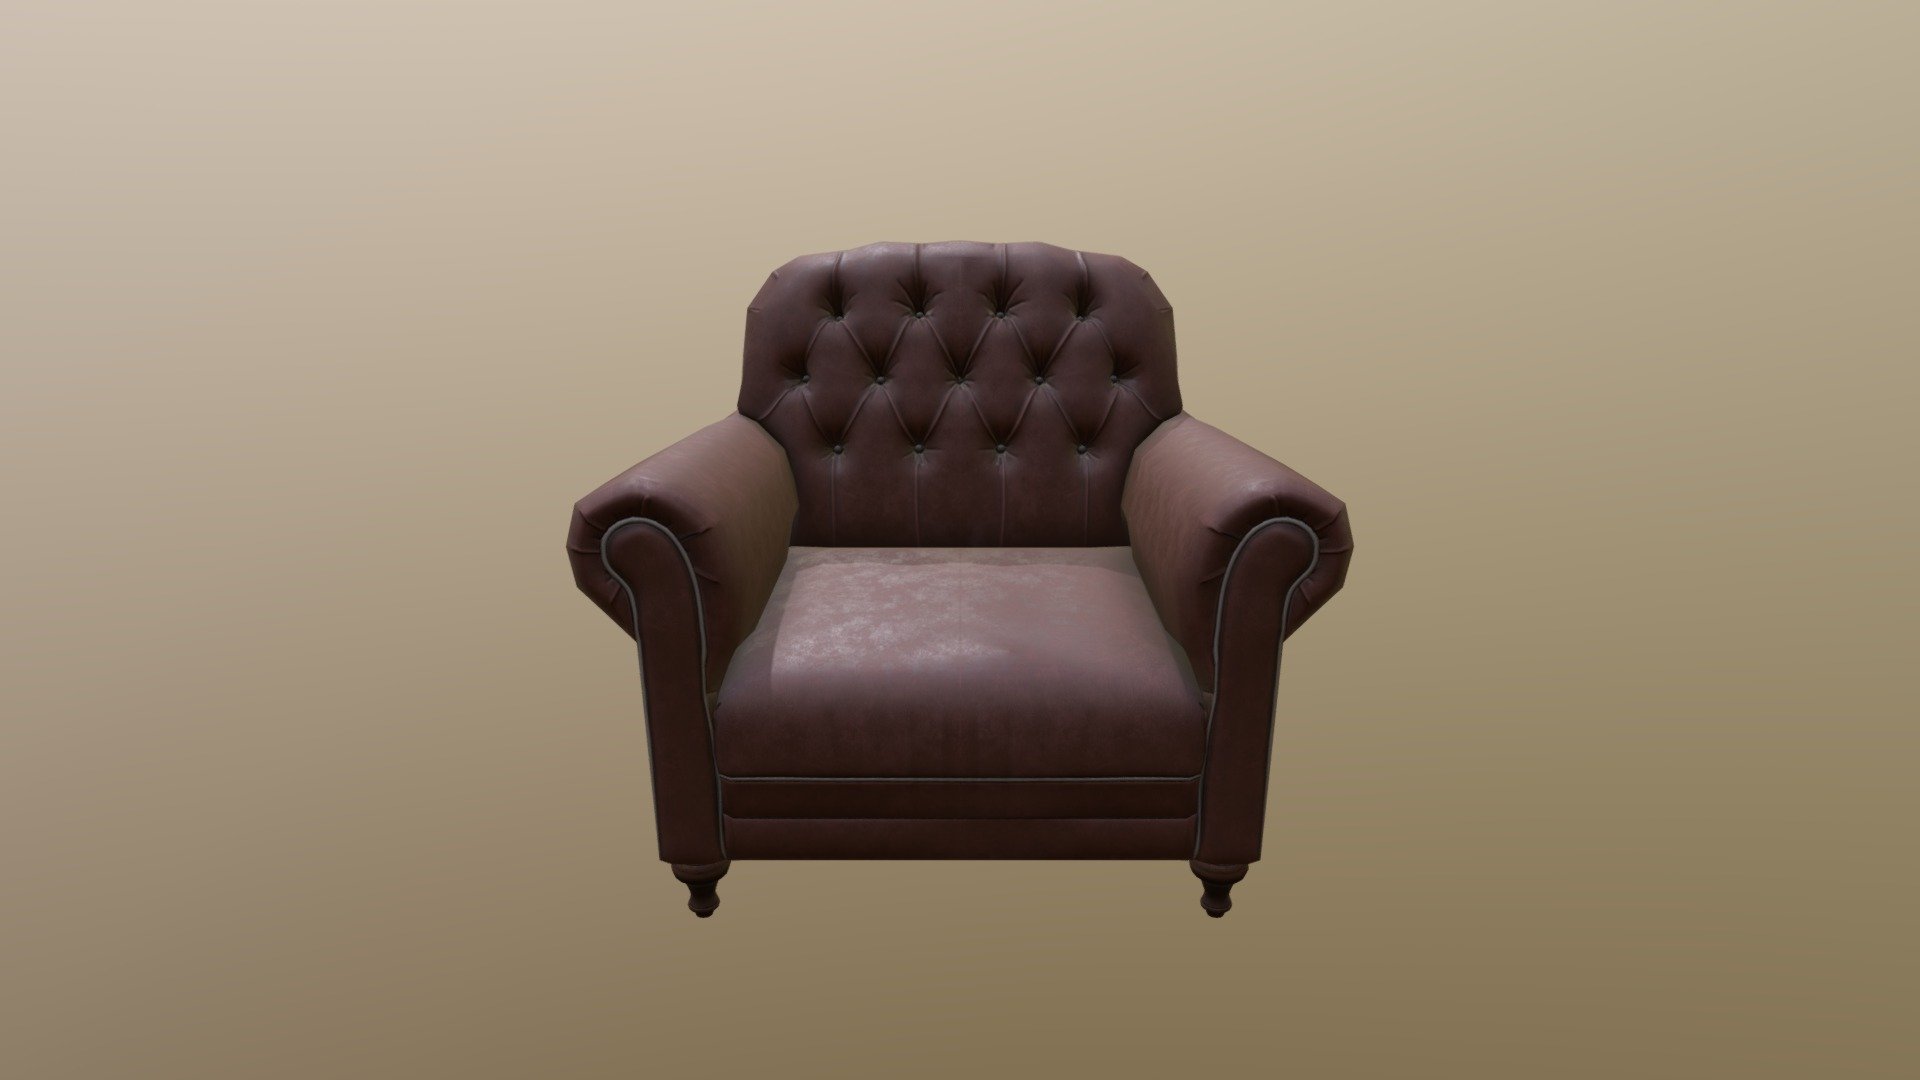 Low poly model classic armchair for game and render - Brown leather Armchair - 3D model by MGD 3d model